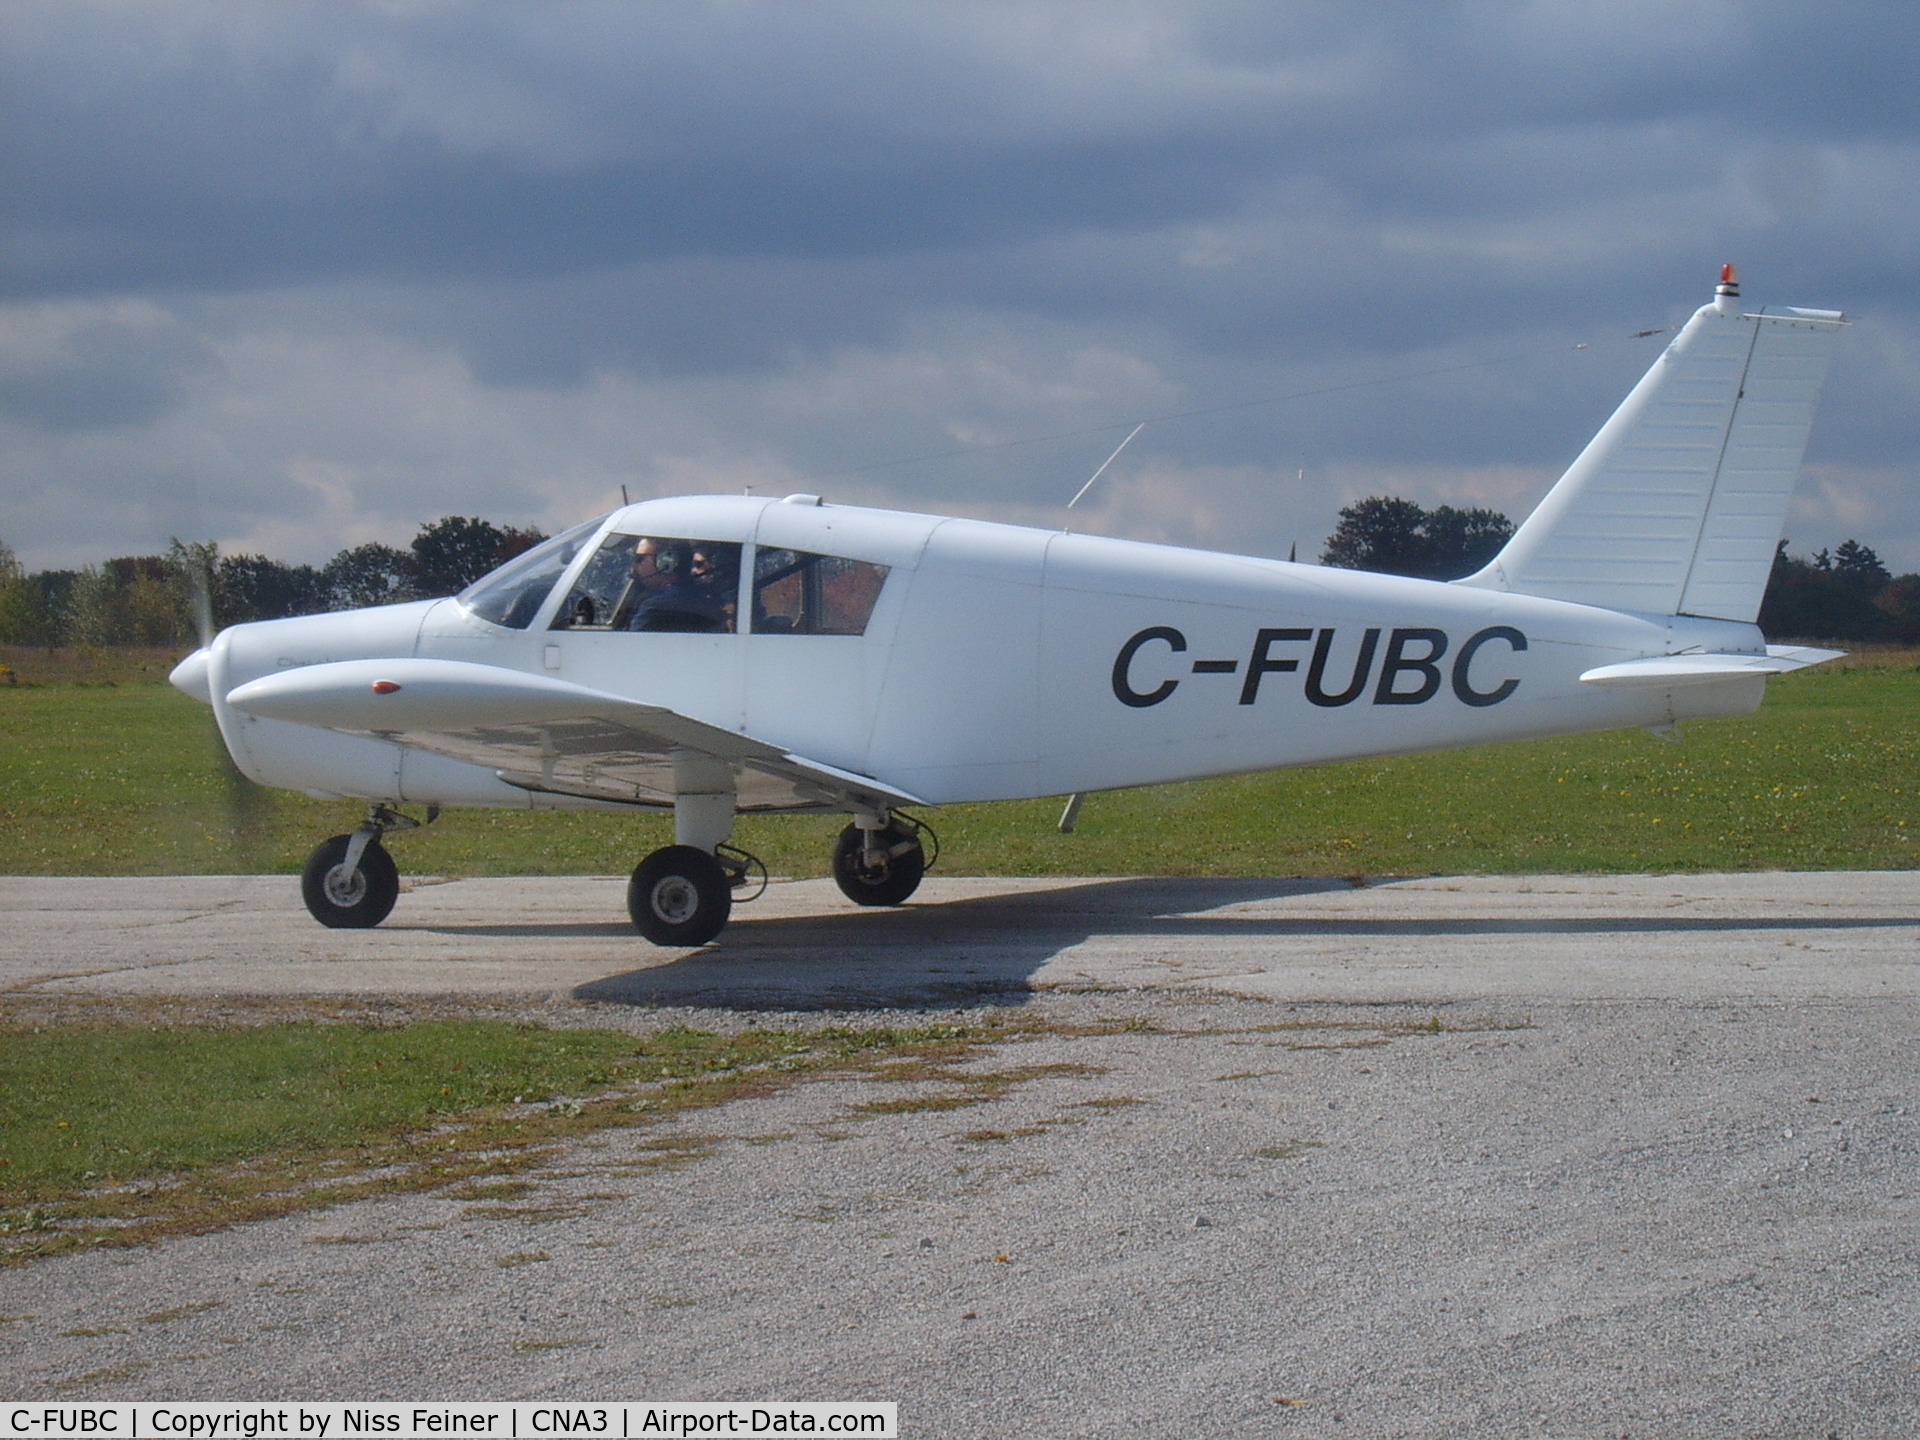 C-FUBC, 1966 Piper PA-28-140 C/N 28-21375, C-FUBC on the taxiway at CNA3